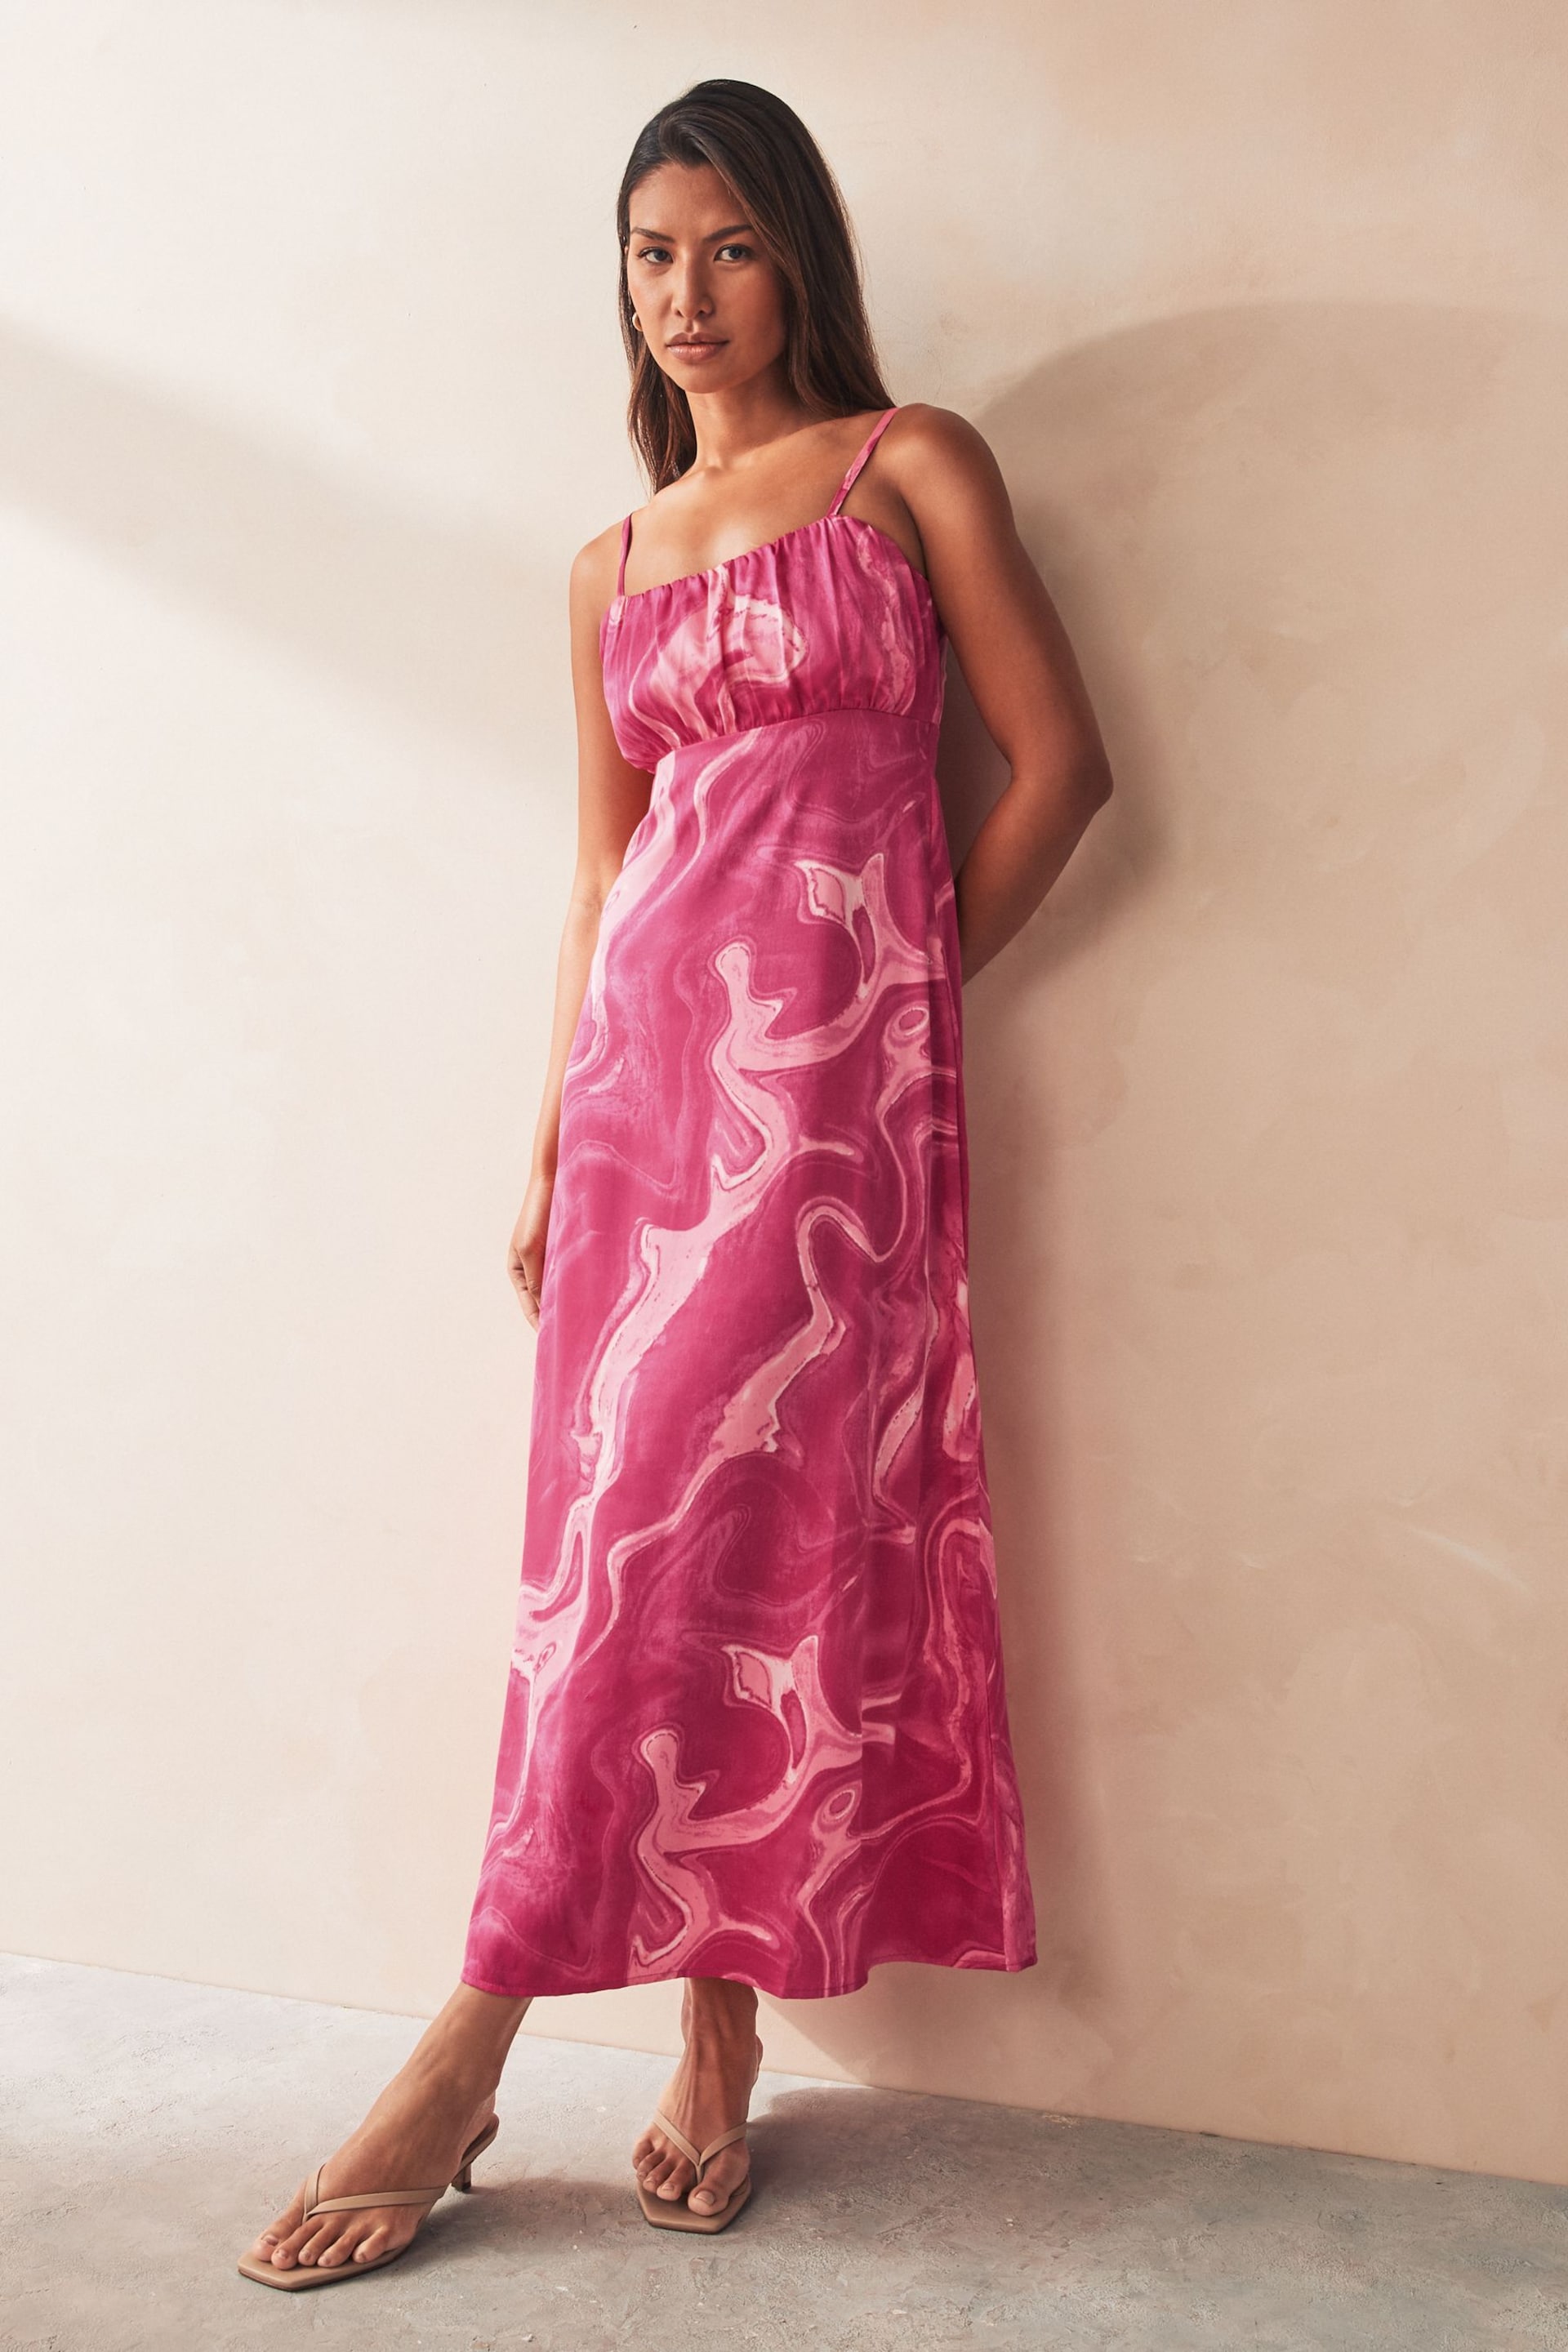 ONLY Pink Marble Print Cami Ruched Detail Midi Dress - Image 1 of 5